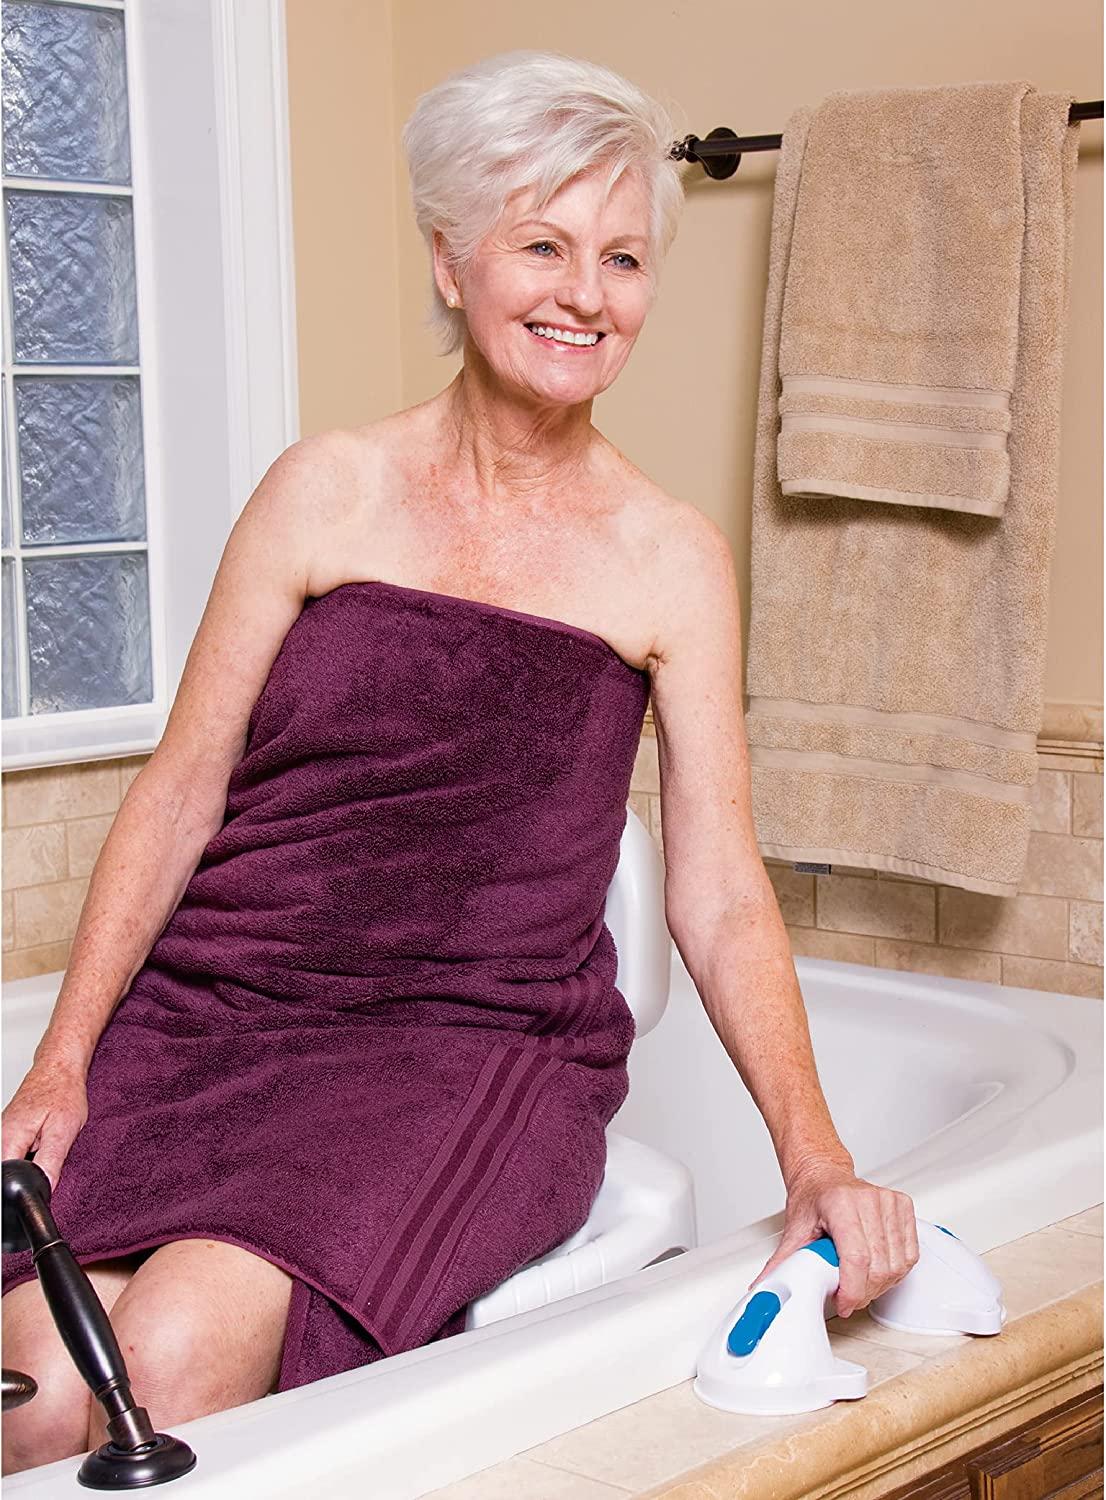 Carex Health Brands Bathtub Rail with Finish Bathtub Grab Bar Safety Bar  for Seniors and Handicap for Assistance Getting in and Out of Tub, Easy to